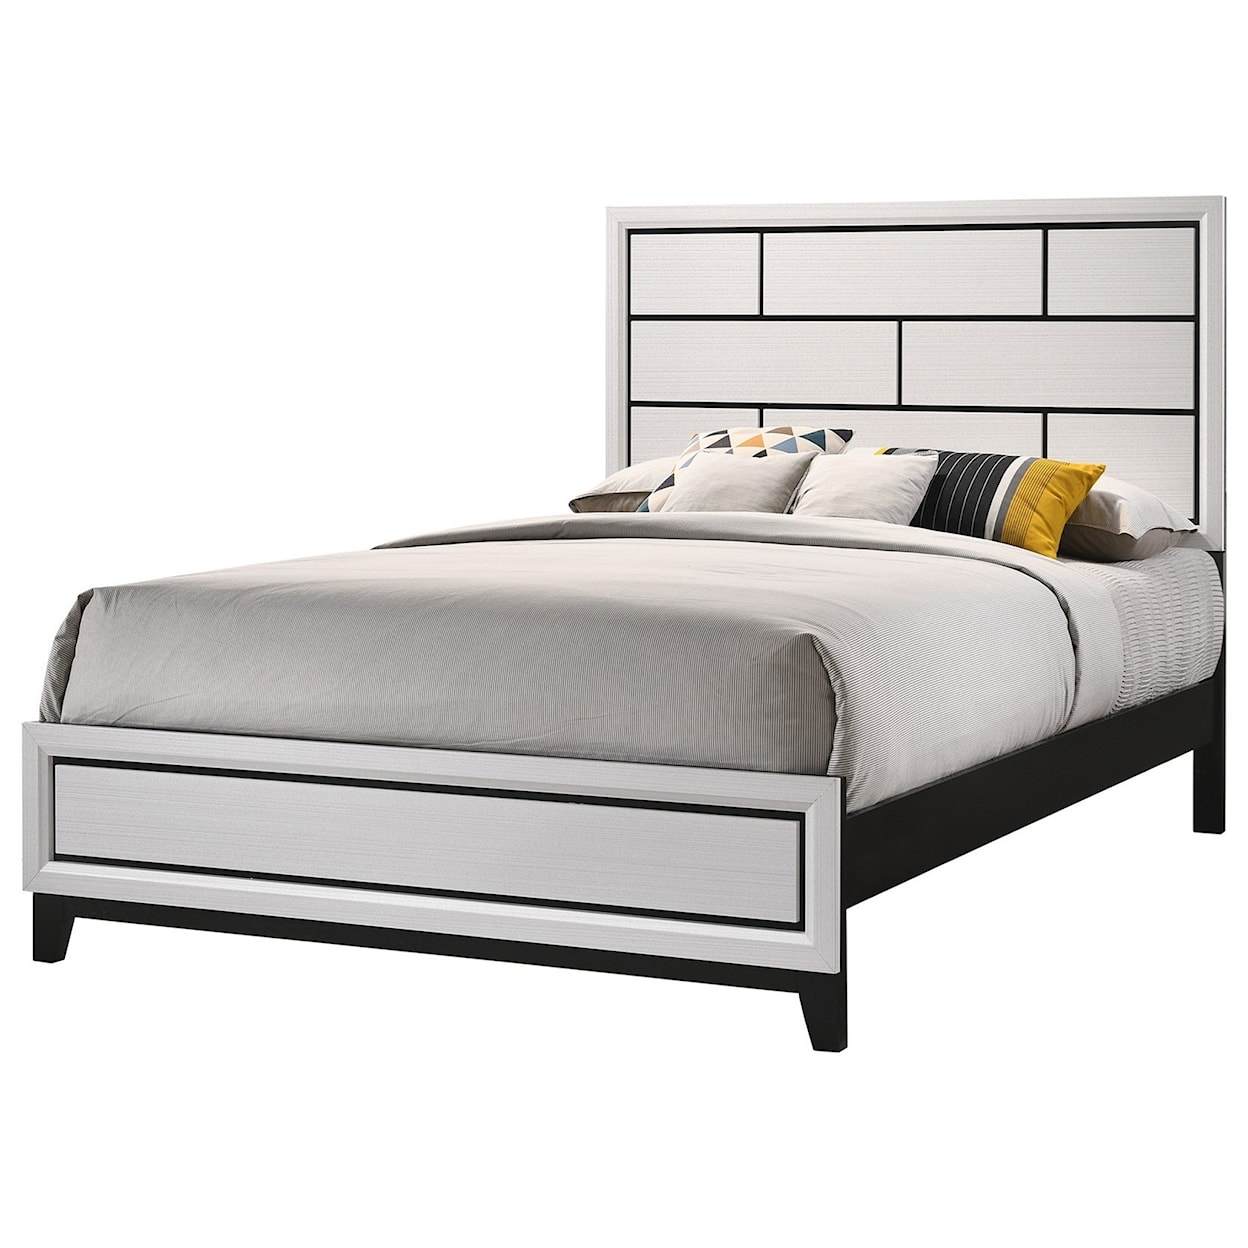 CM Akerson Queen Bed